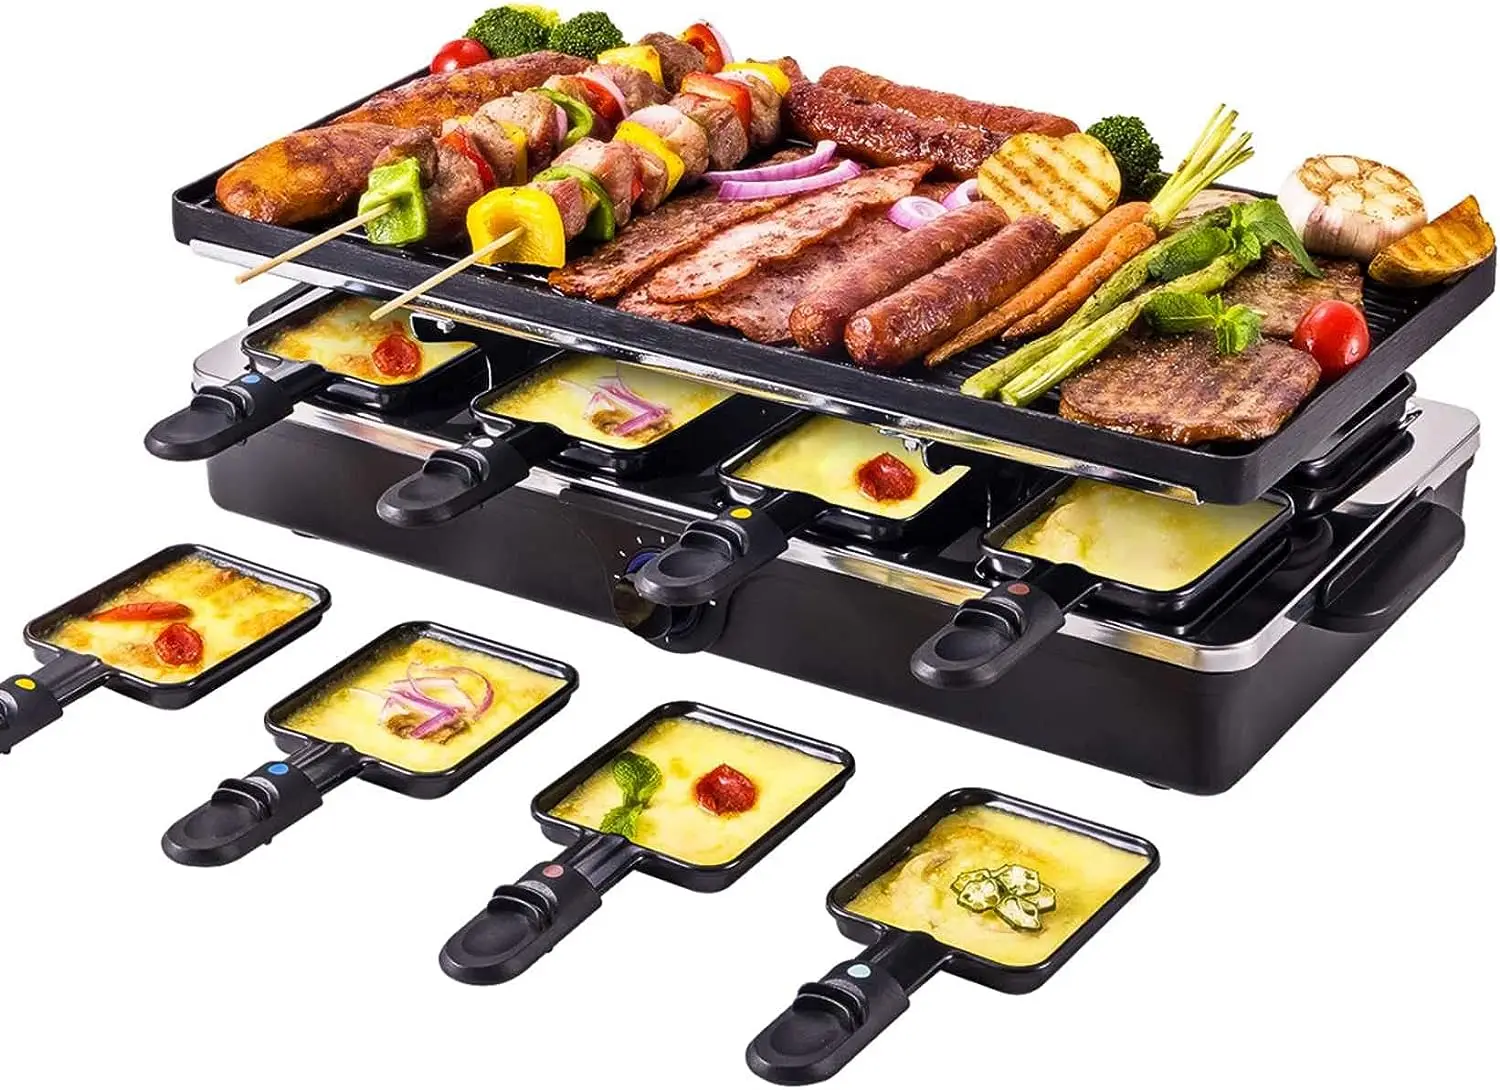 

Table Grill Korean BBQ Indoor Grill Griddle Nonstick Extra Large Reversible 2-In-1 Outdoor Dishwasher Safe with Cheese 8 Paddle